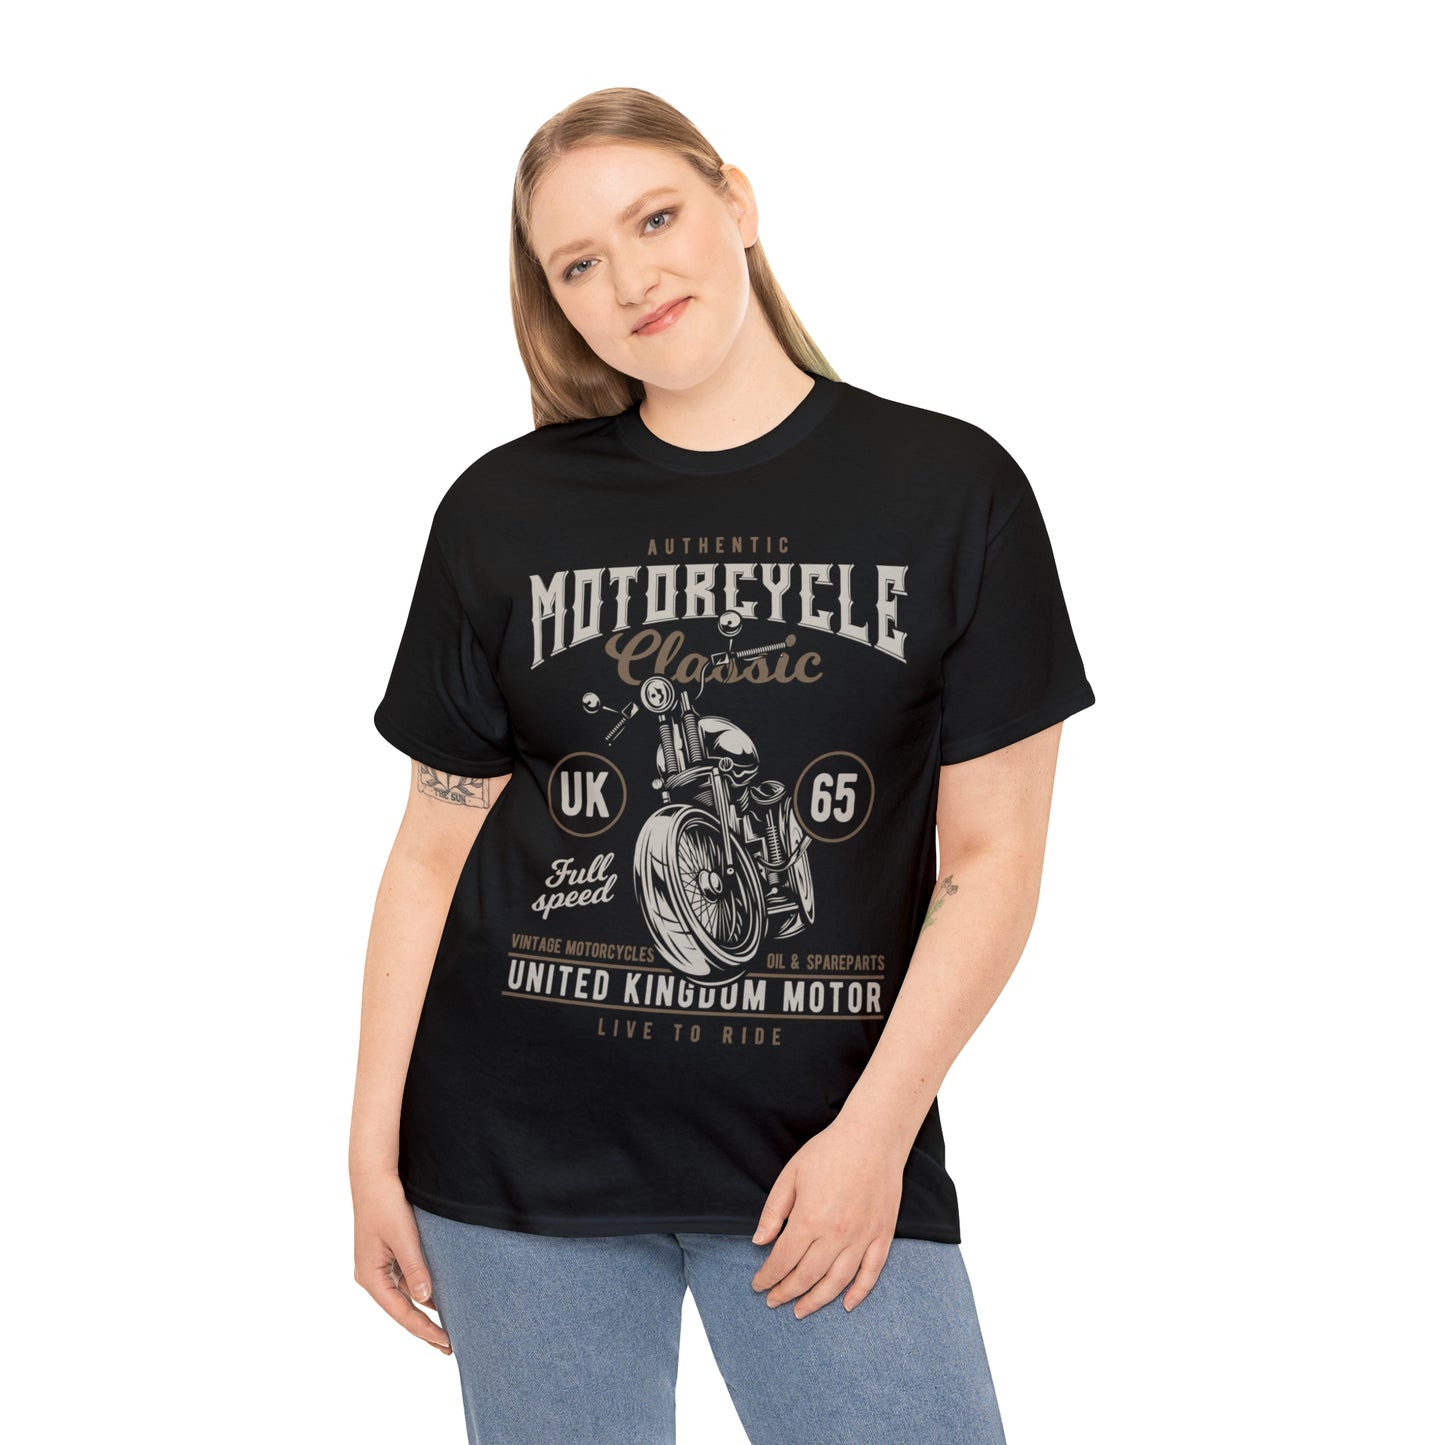 Authentic Motorcycle Classic Tee